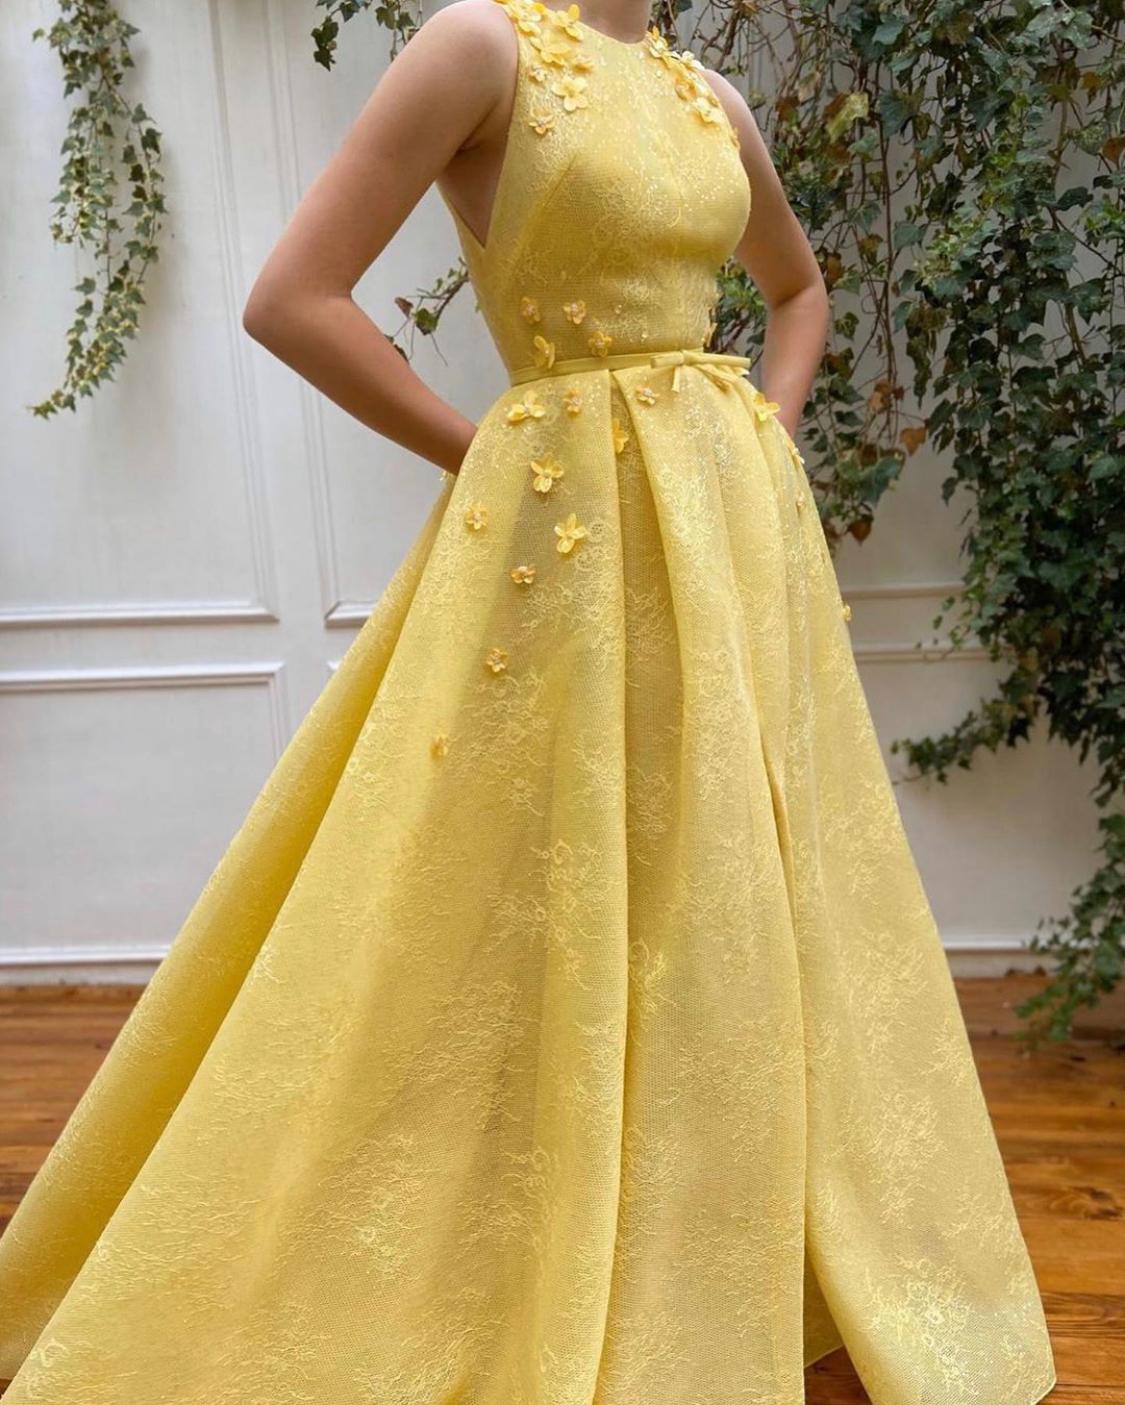 Yellow A-Line dress with no sleeves and embroidery